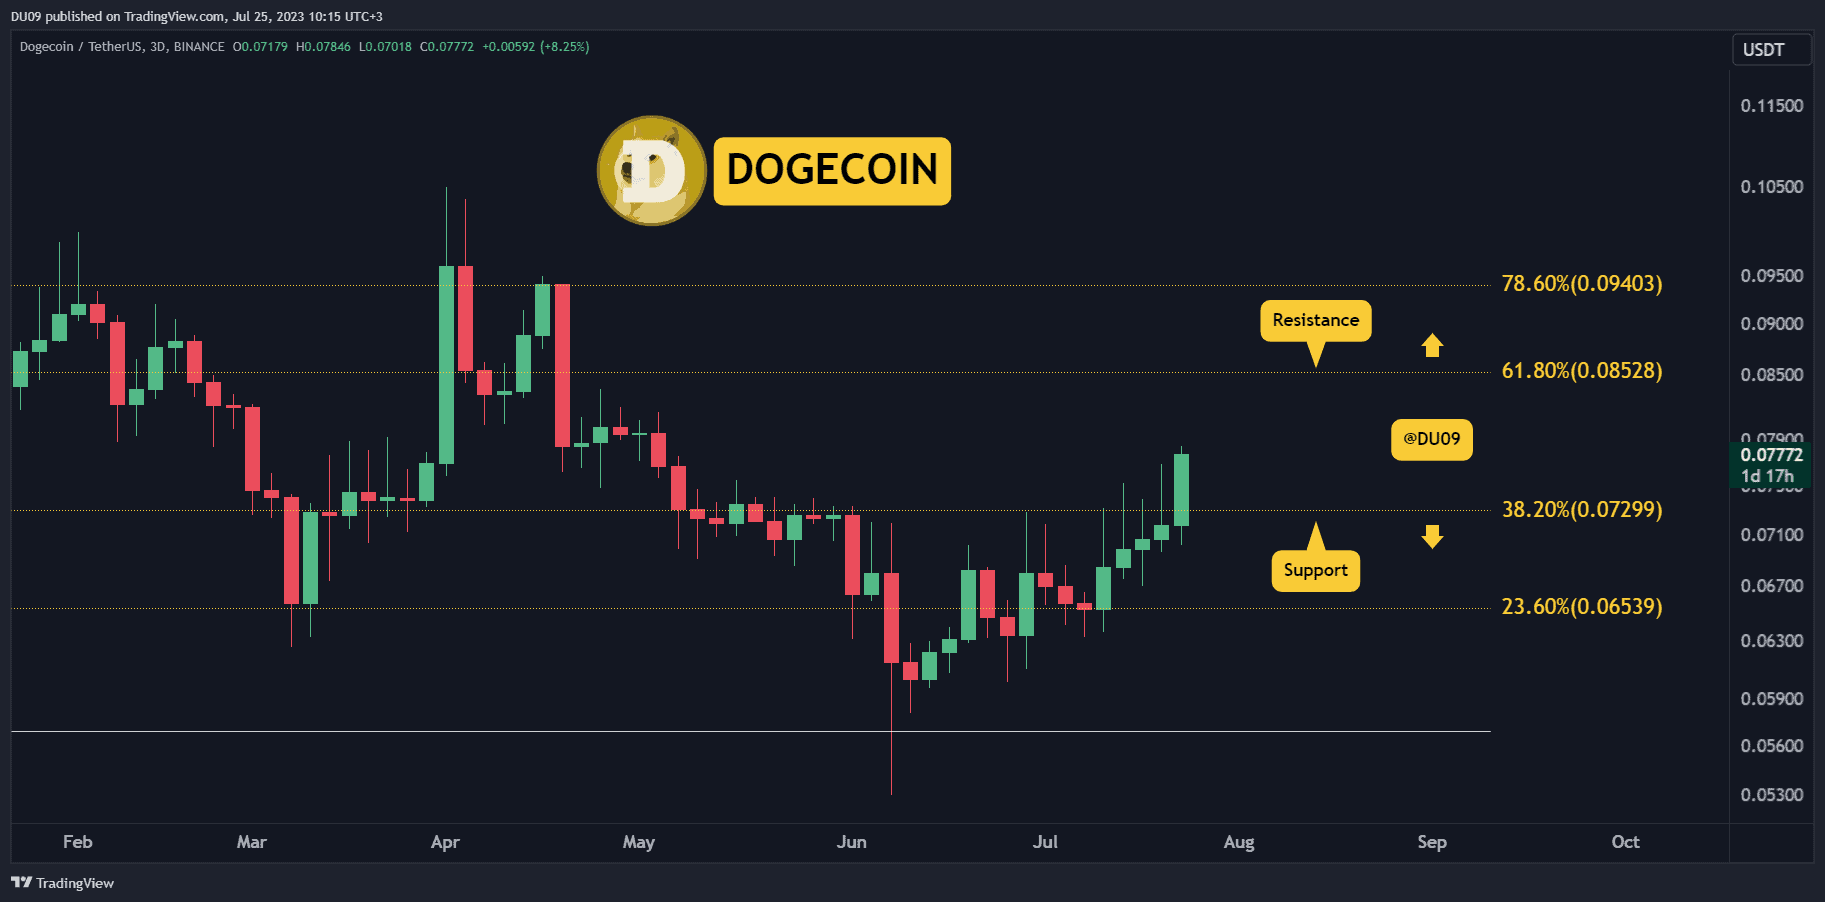 Why-is-doge-is-pumping-and-how-high-can-it-go?-three-things-to-watch-(dogecoin-price-analysis)